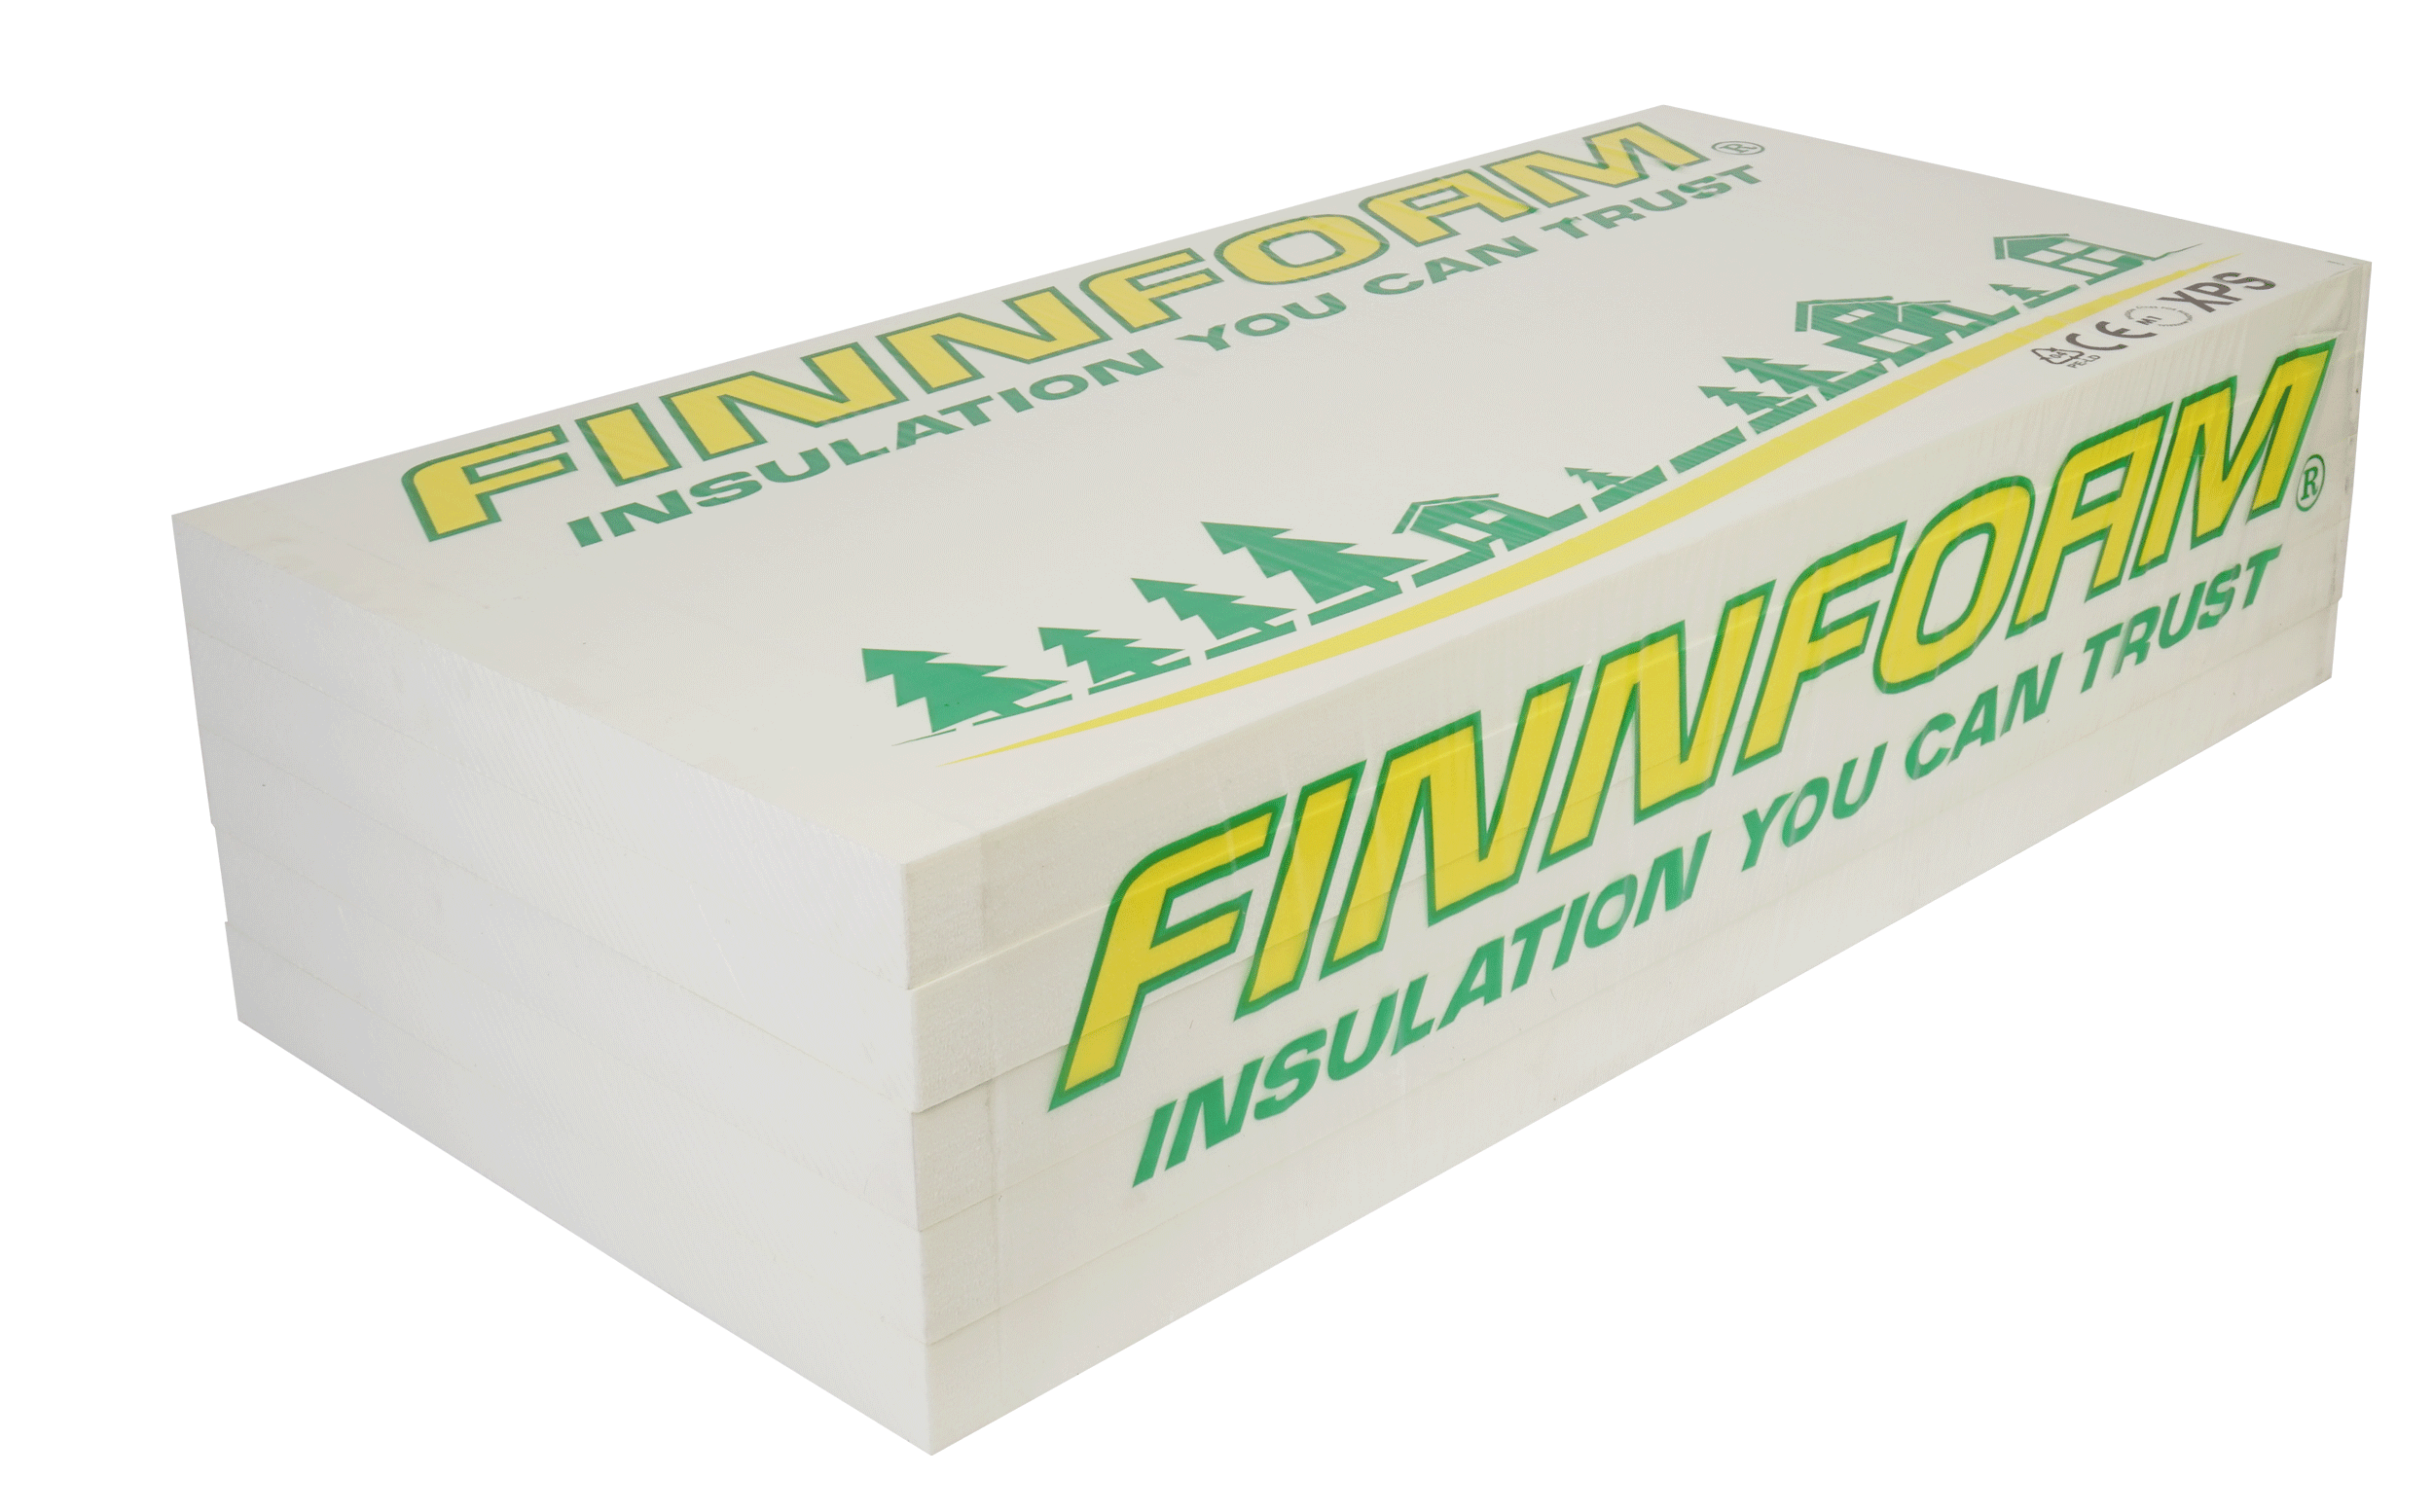 Technical insulations